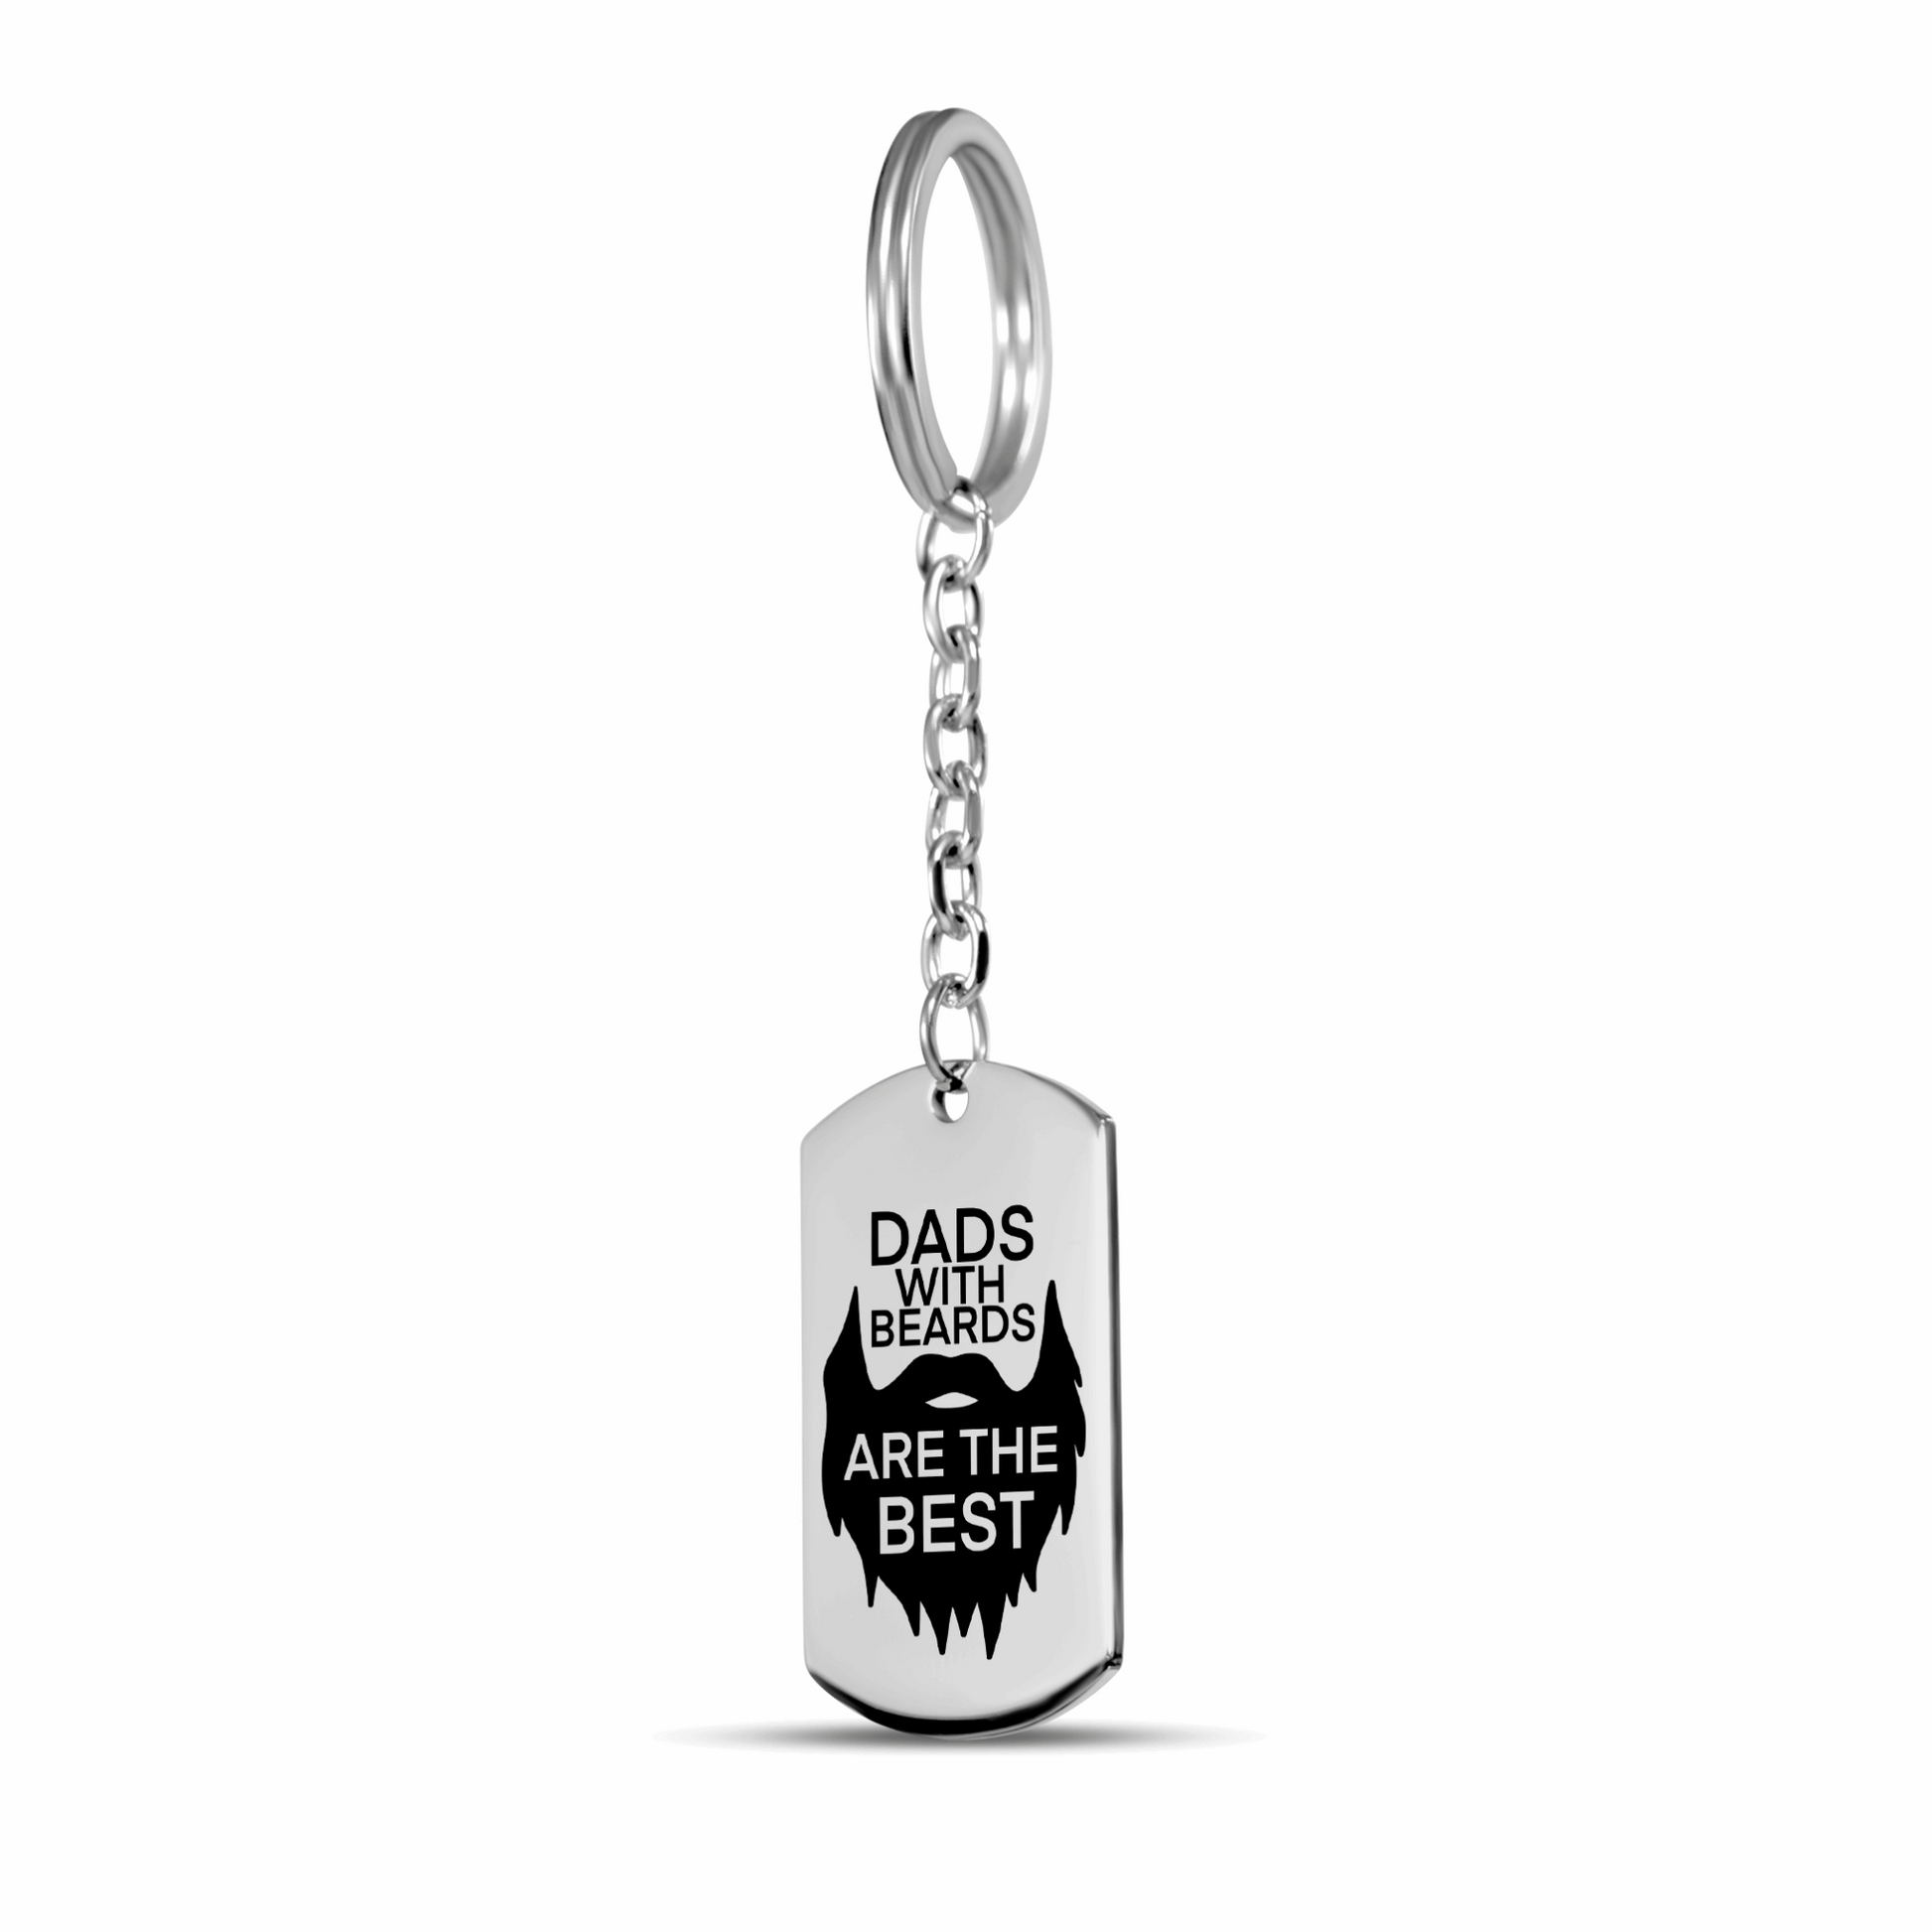 Personalized Keyrings - Bearded Dad Personalized Keyring 